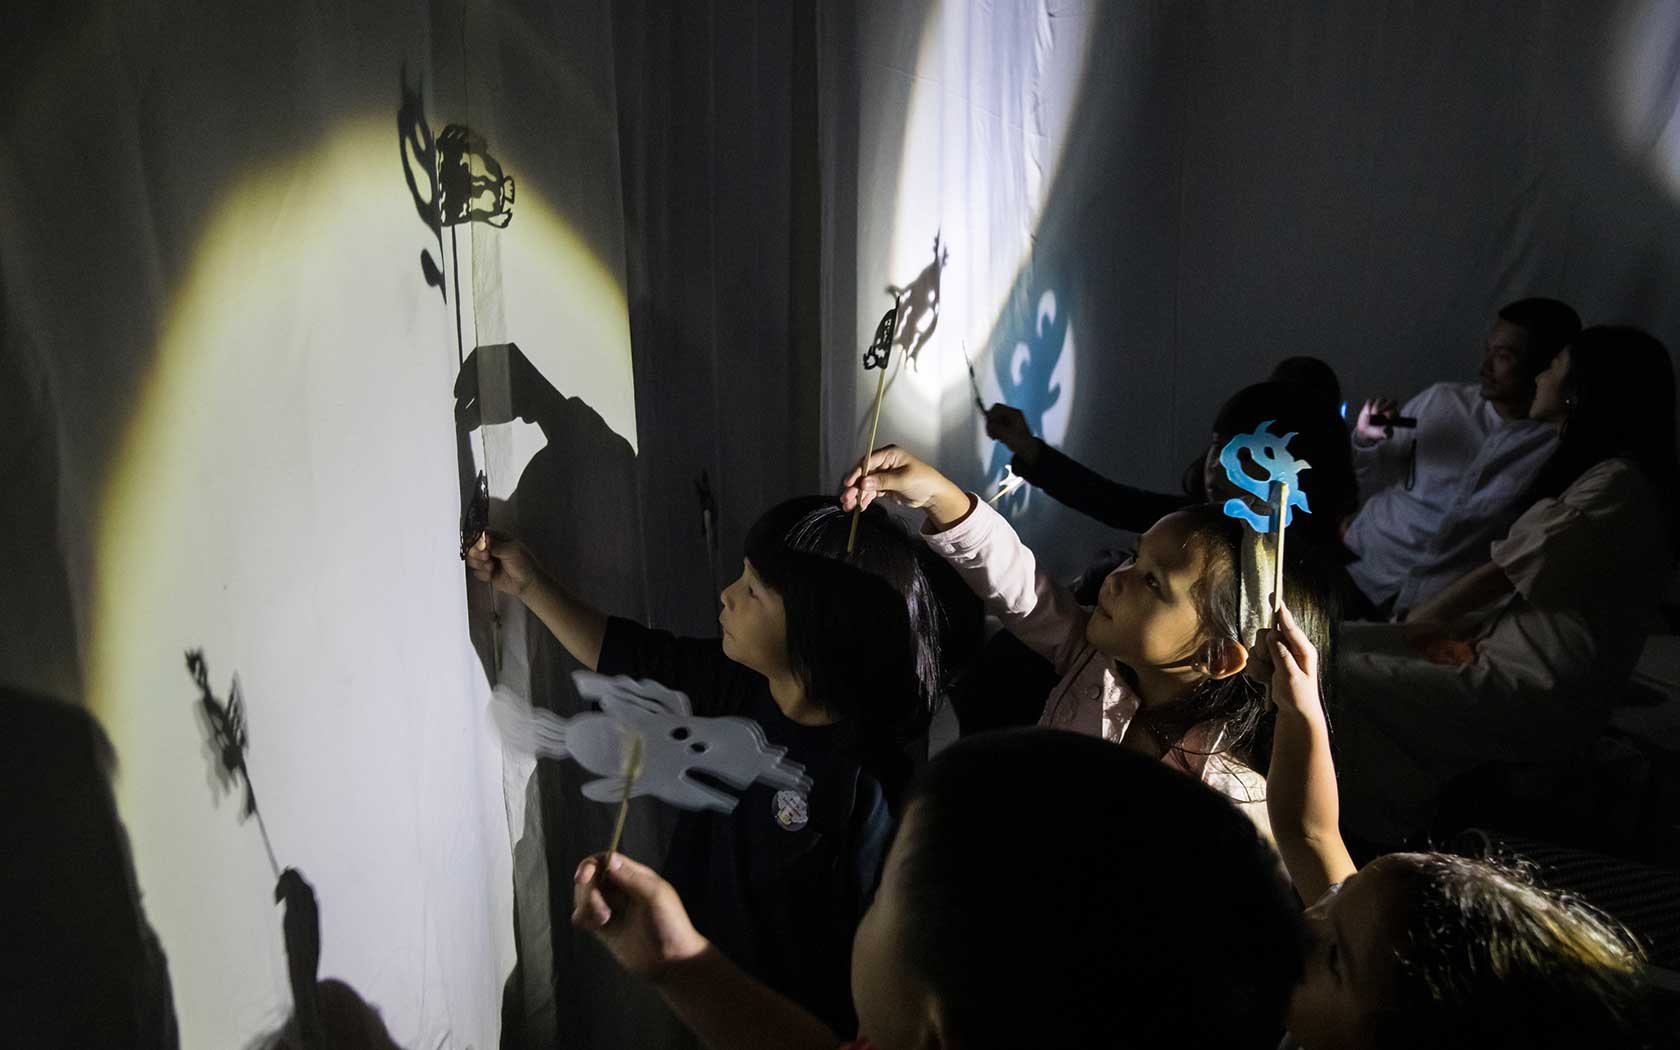 Image of children playing with puppets and shadows during a performance at Esplanade.